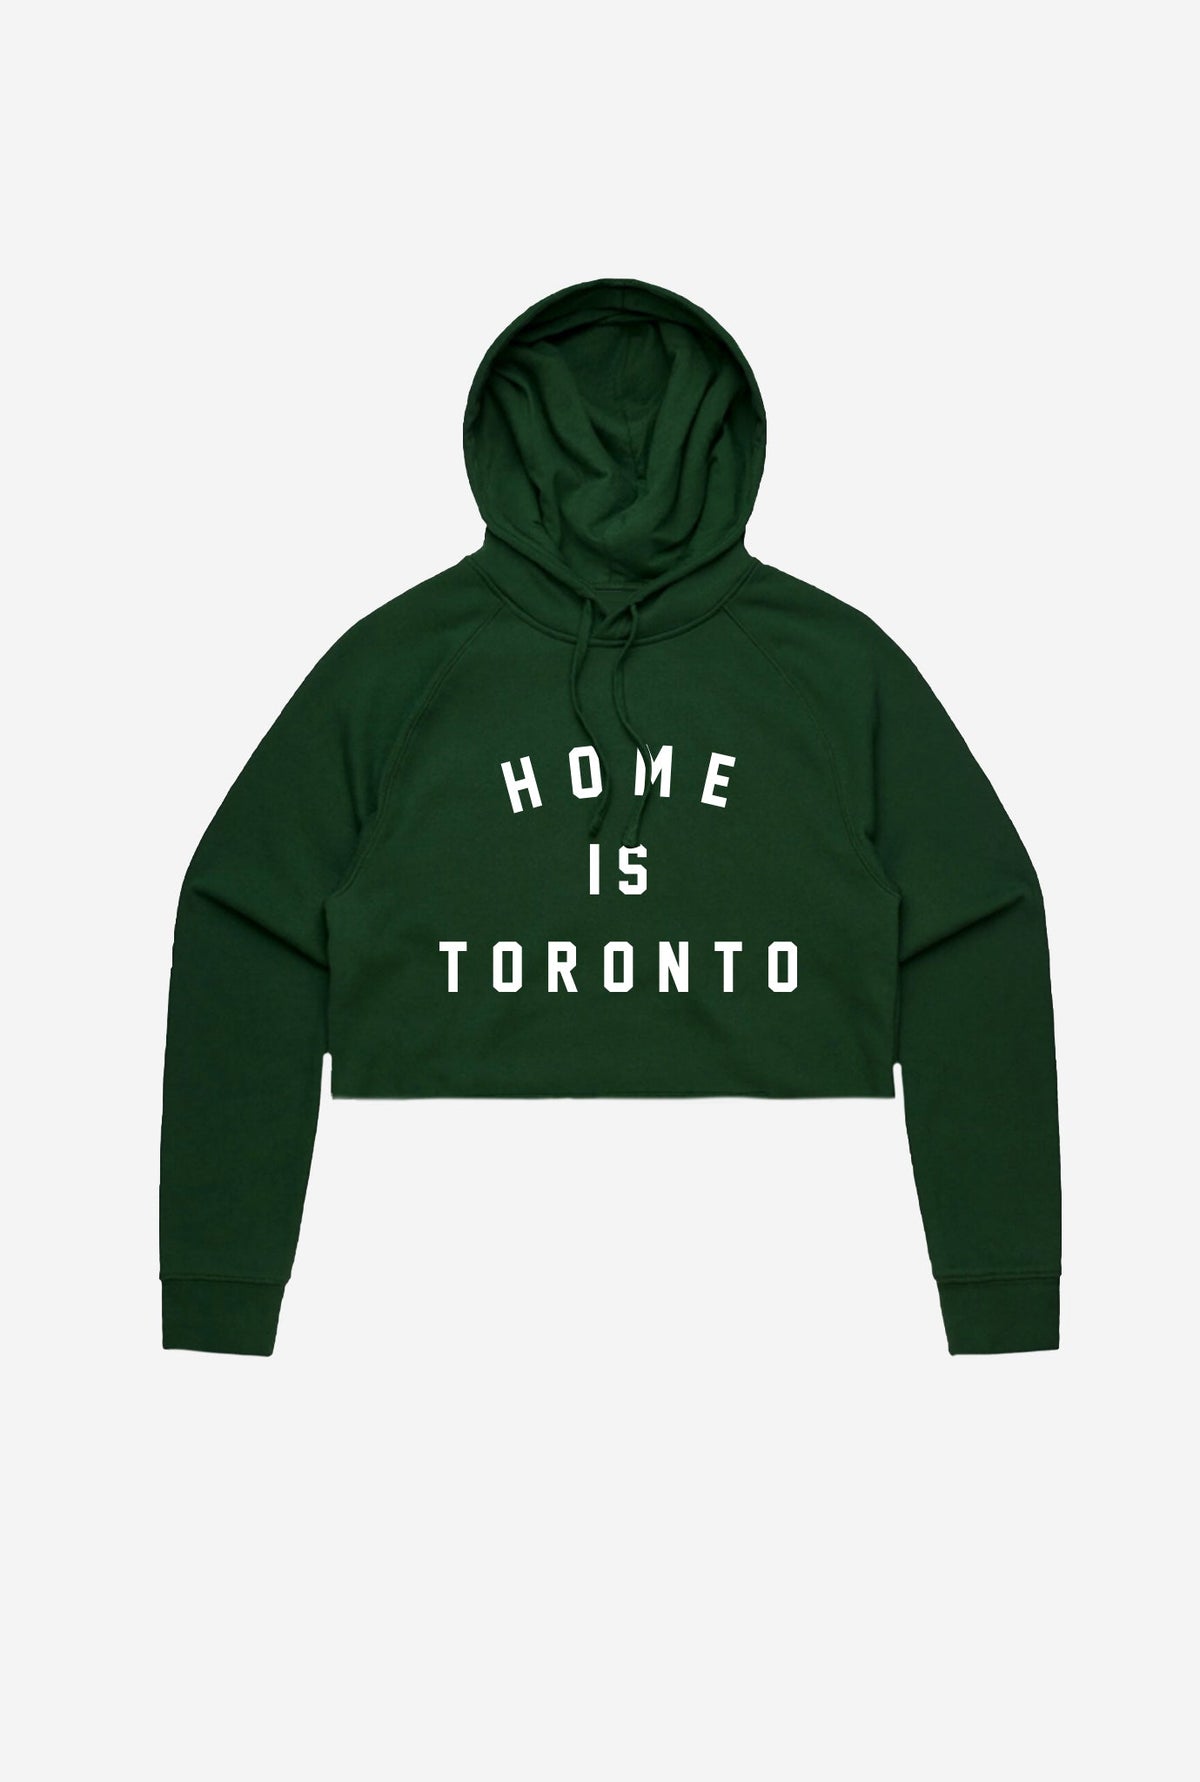 Home is Toronto Varsity Cropped Hoodie - Forest Green